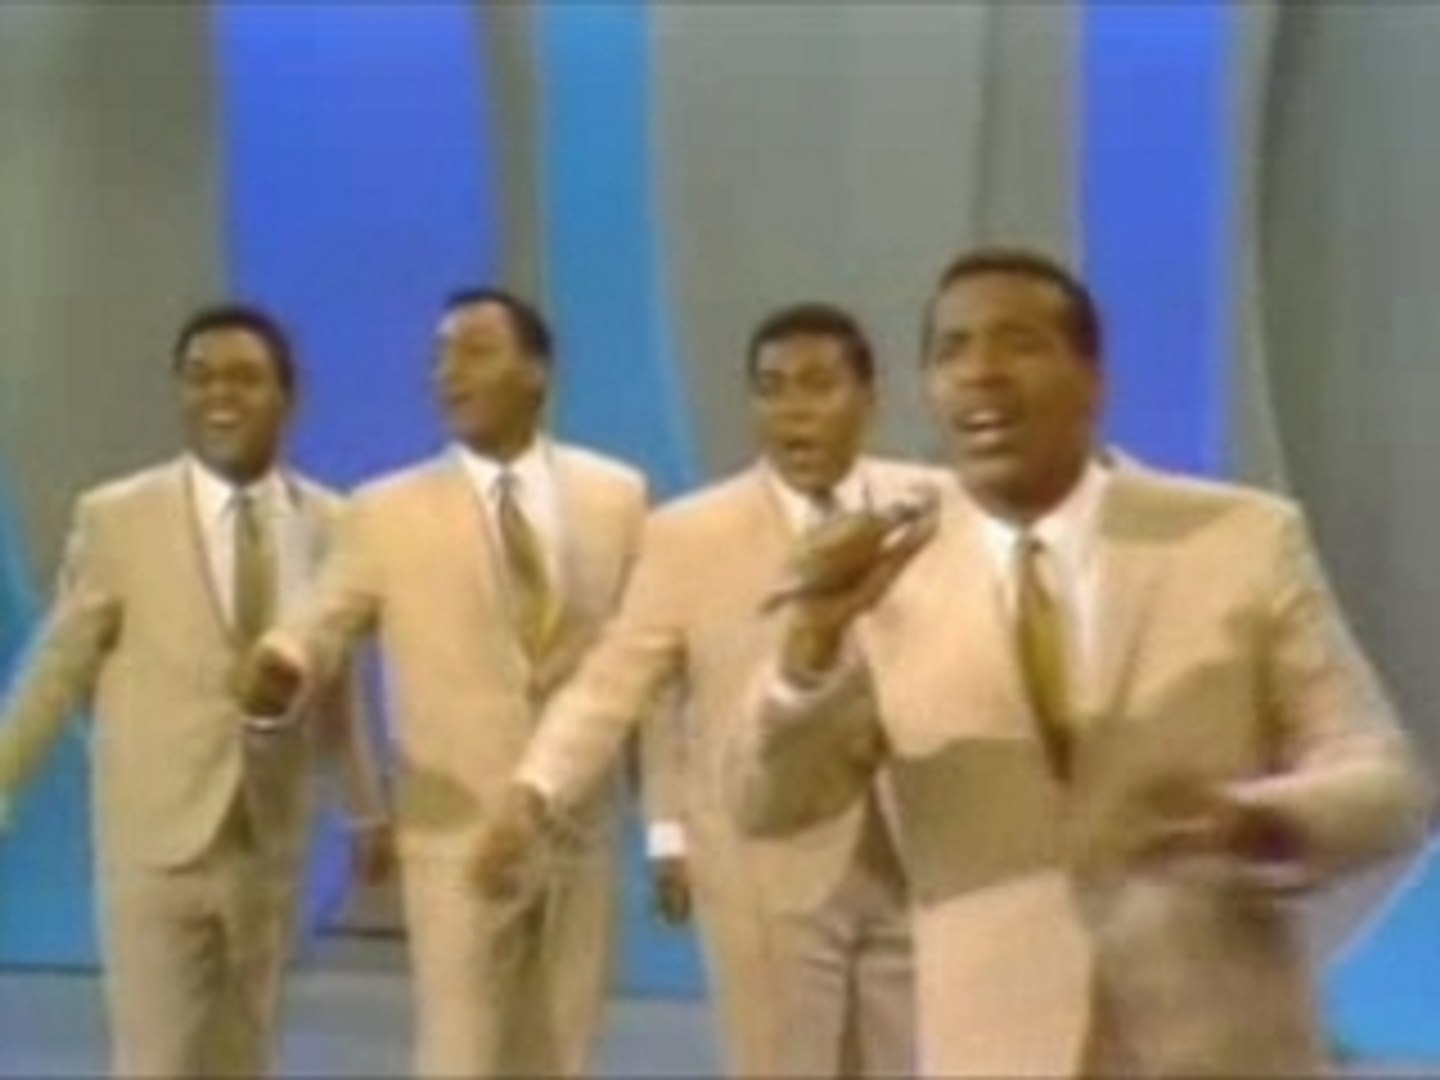 The Four Tops - Reach out (I'll be there) - Vidéo Dailymotion